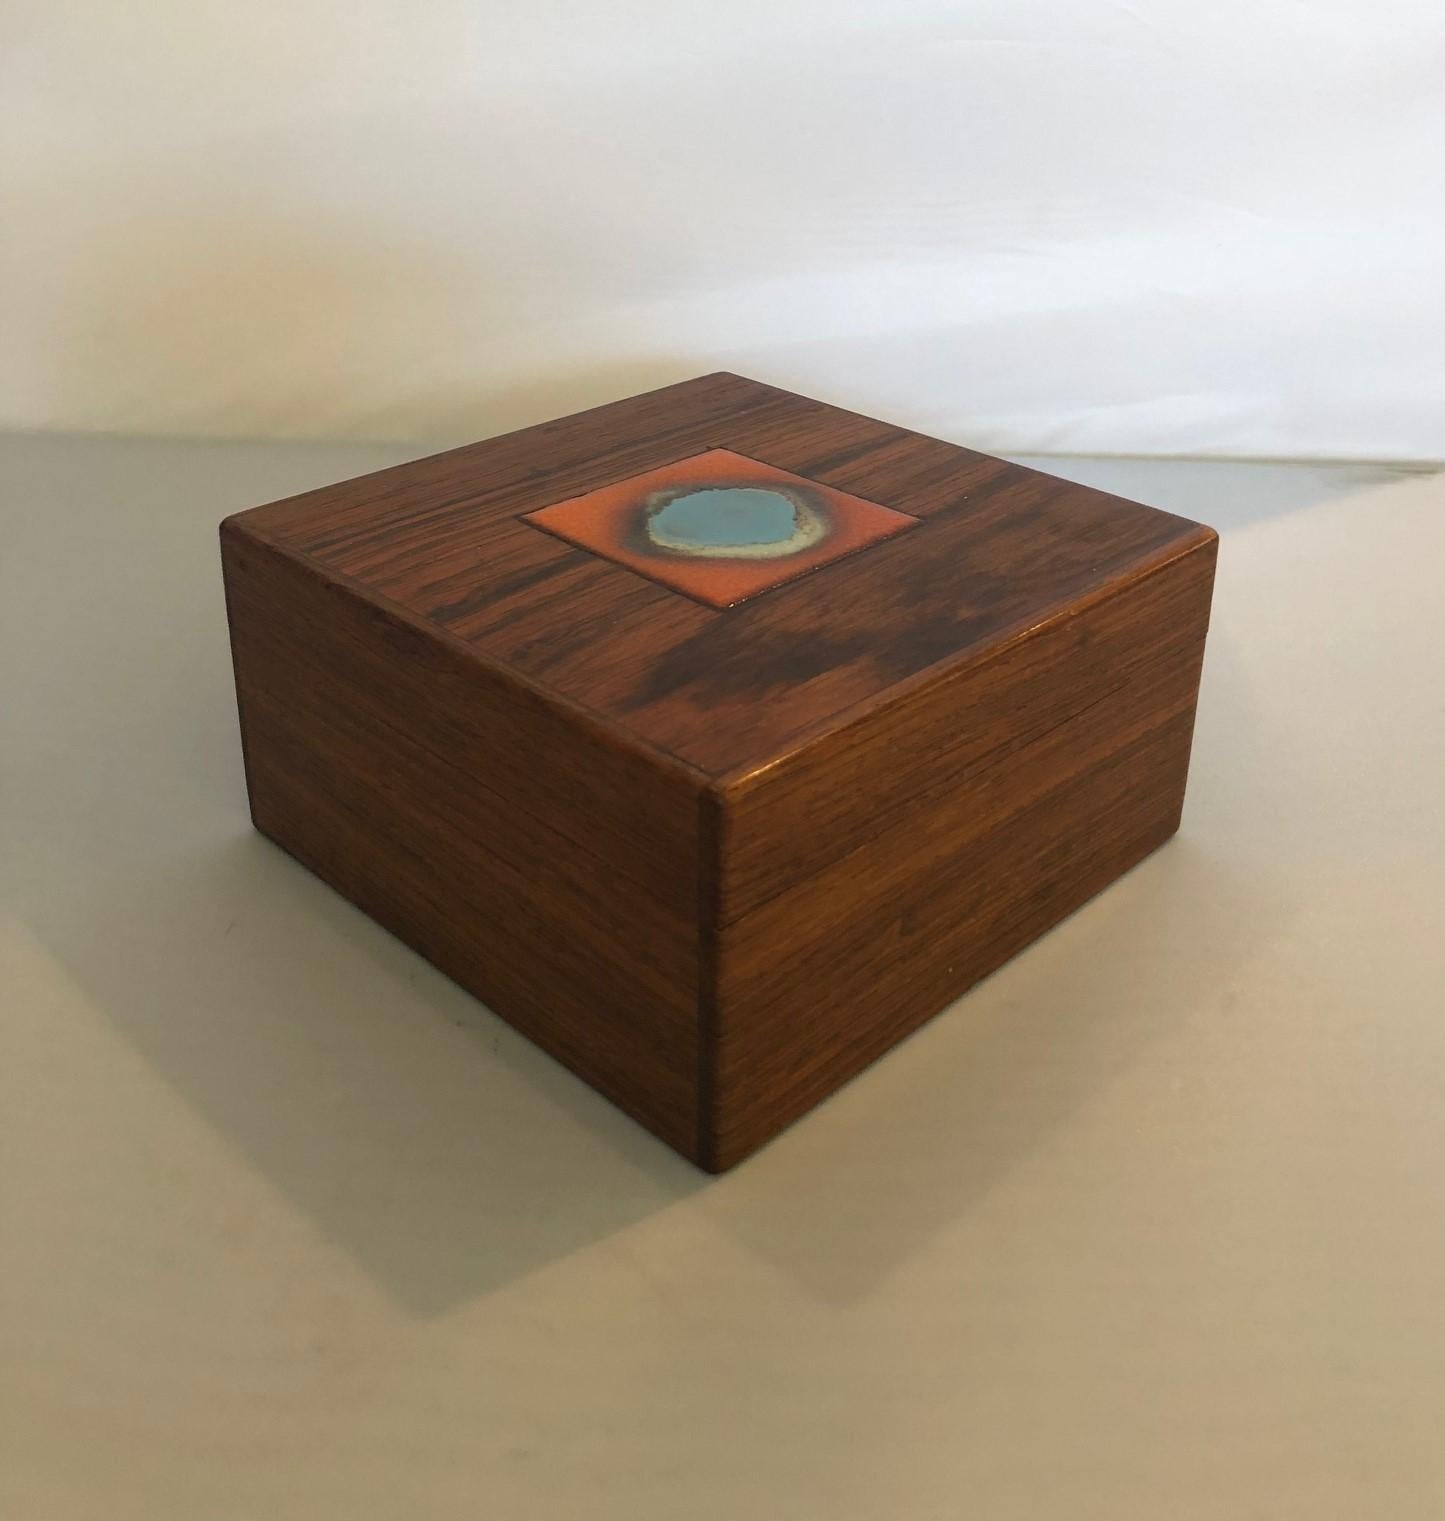 Beautifully crafted solid rosewood trinket box by Danish craftsman Alfred Klitgaard, circa 1960s. Very detailed construction and exquisite finish with a gorgeous Bodil Eje orange / light blue ceramic tile inset in the lid.

Measurements: 4.75